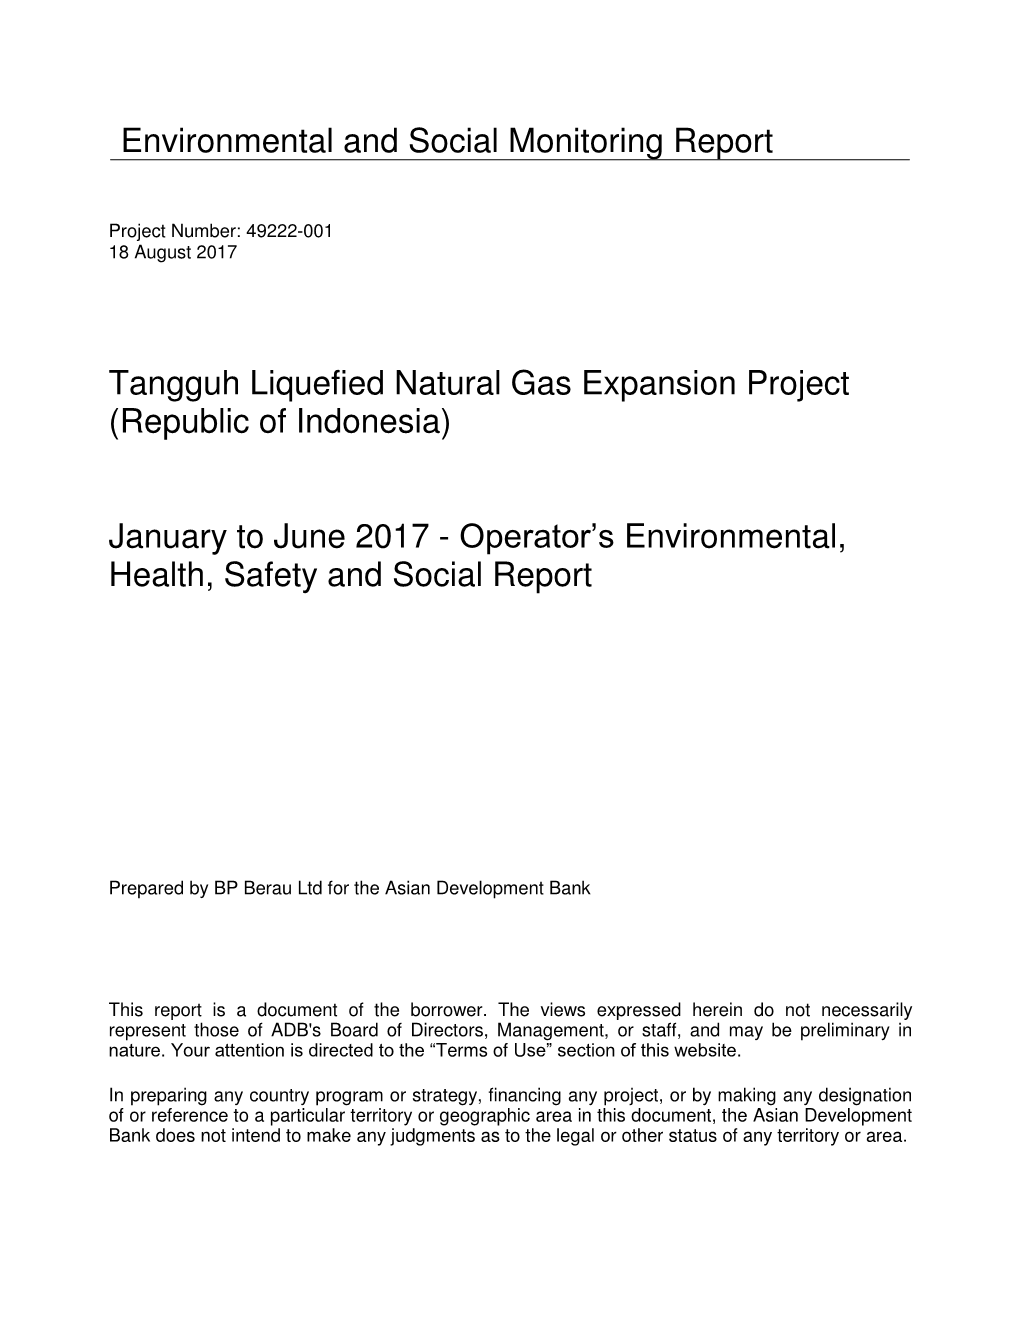 Tangguh Liquefied Natural Gas Expansion Project (Republic of Indonesia)